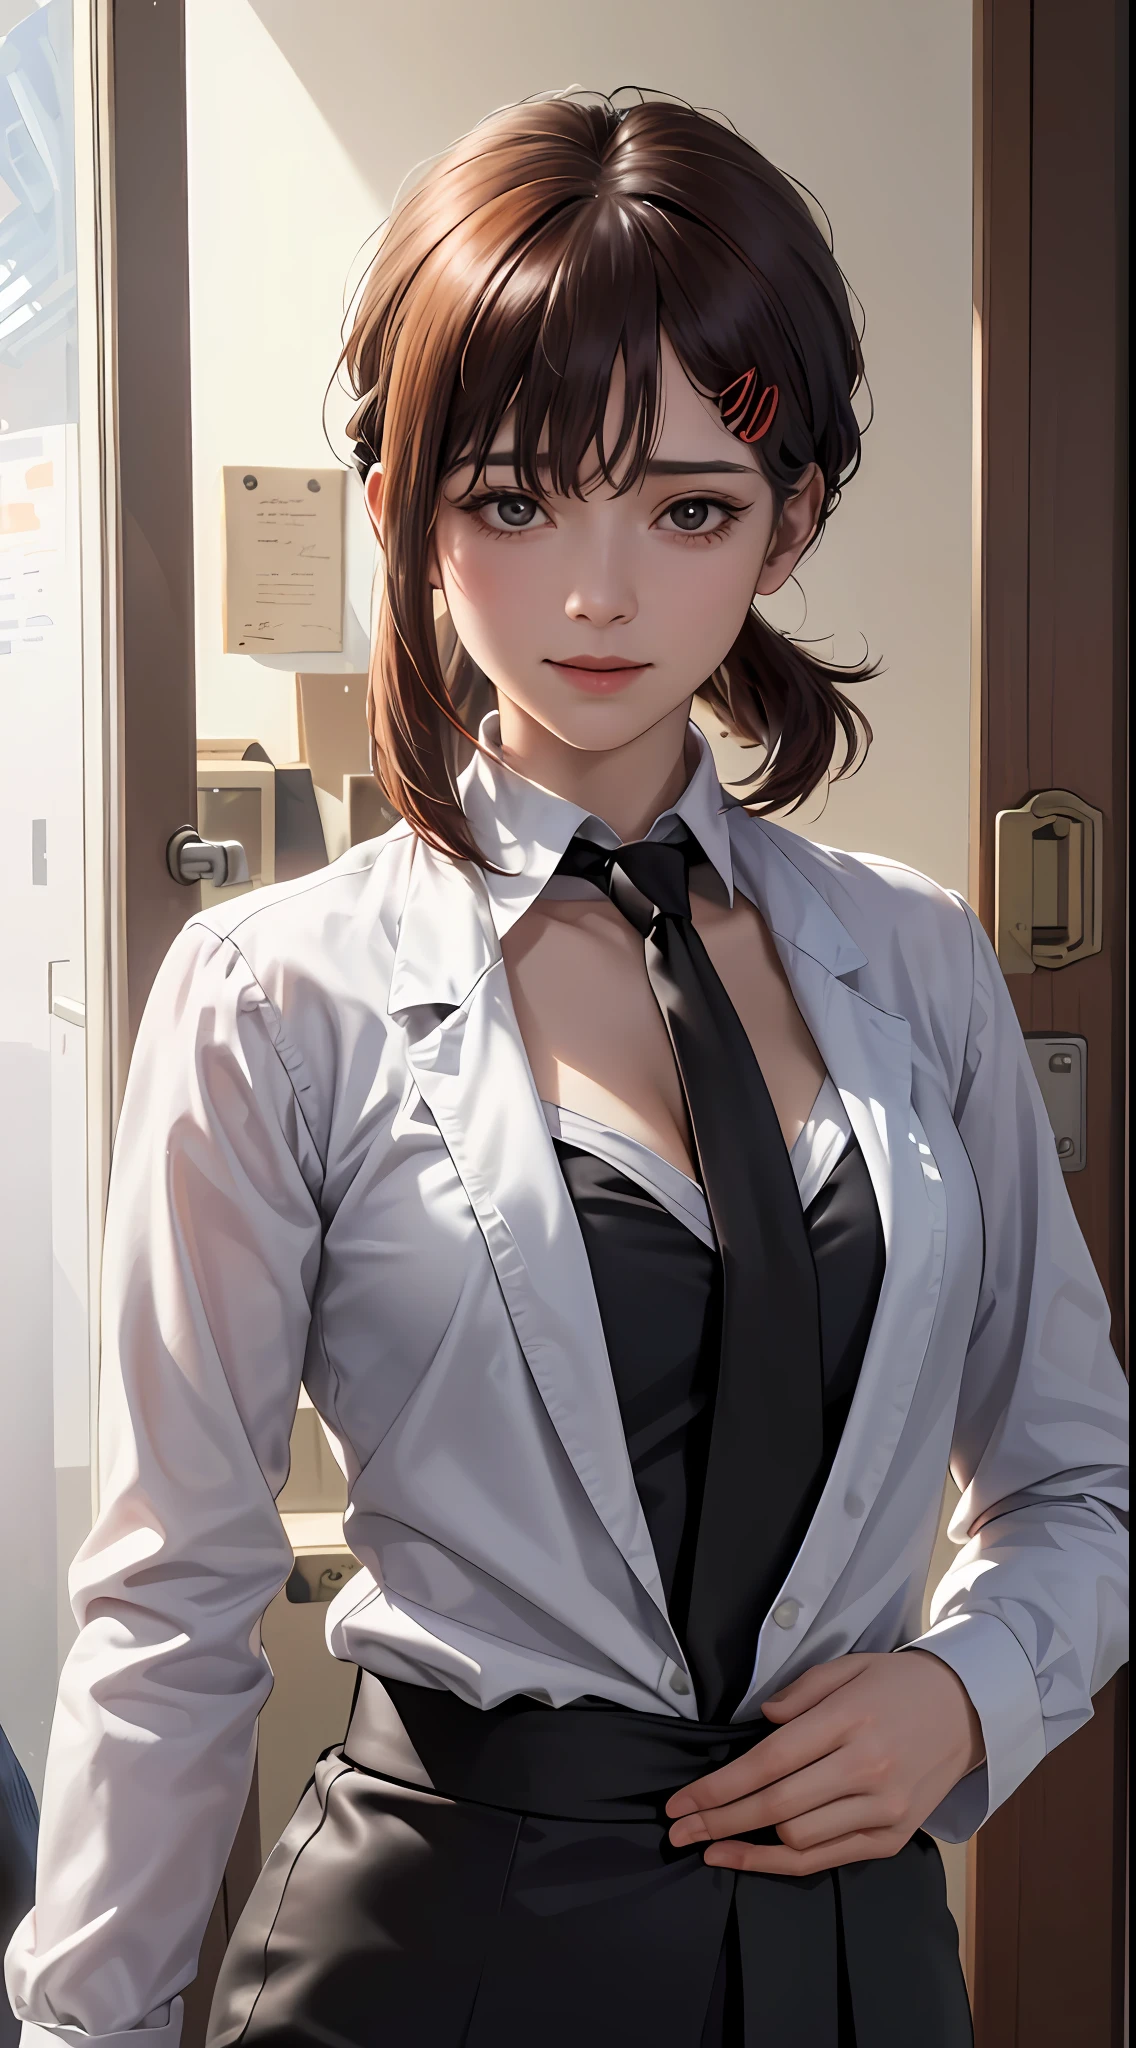 tmasterpiece，best qualtiy，ultra - detailed，illustratio，epic lighting，cinematic compositions，isometry，1girl，solo，adolable，cleavage，with brown eye，black color hair，sweeping bangs，single hair，red hair clips，blouse with a white collar，black necktie，Black pantsuit，formal，a captivating gaze，captivating posture，inside in room，office room，doors，Open the door，looking at viewert，peeking out upper body，Be red in the face，seduct smile，Shut your mouth，(8K:1.1),